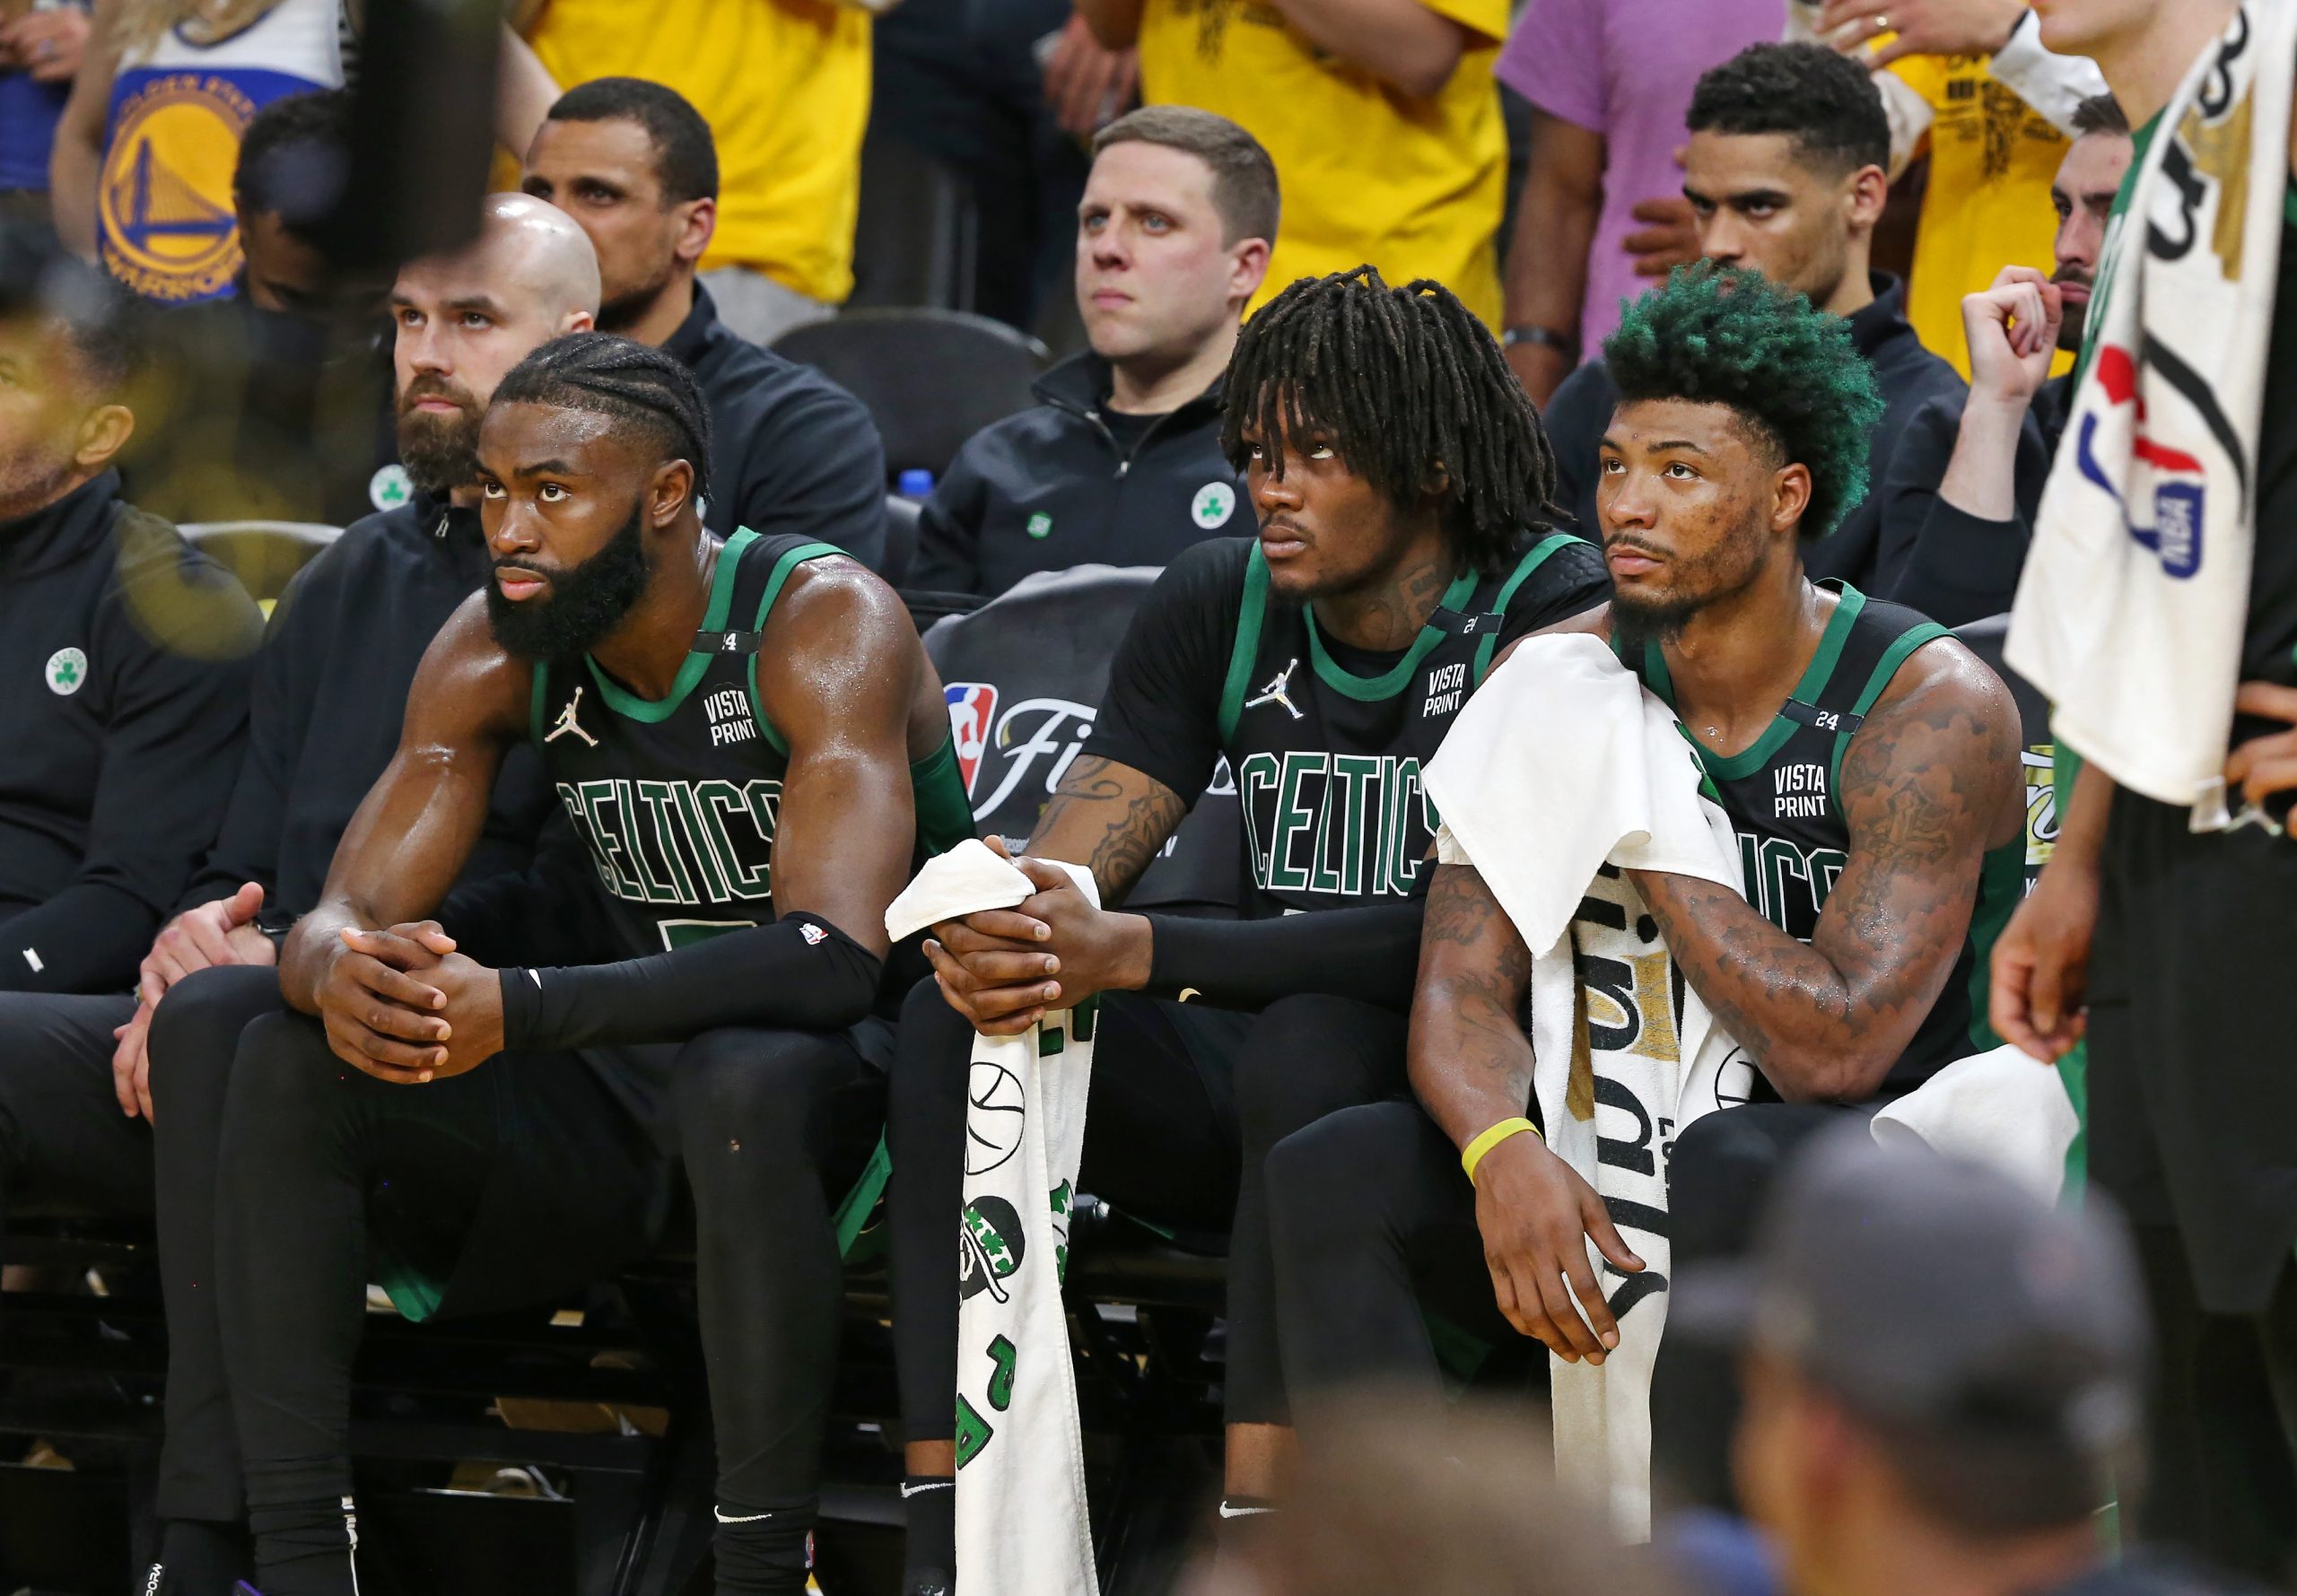 Jaylen Brown, Robert Williams, and Marcus Smart of the Boston Celtics are pictured on the bench.